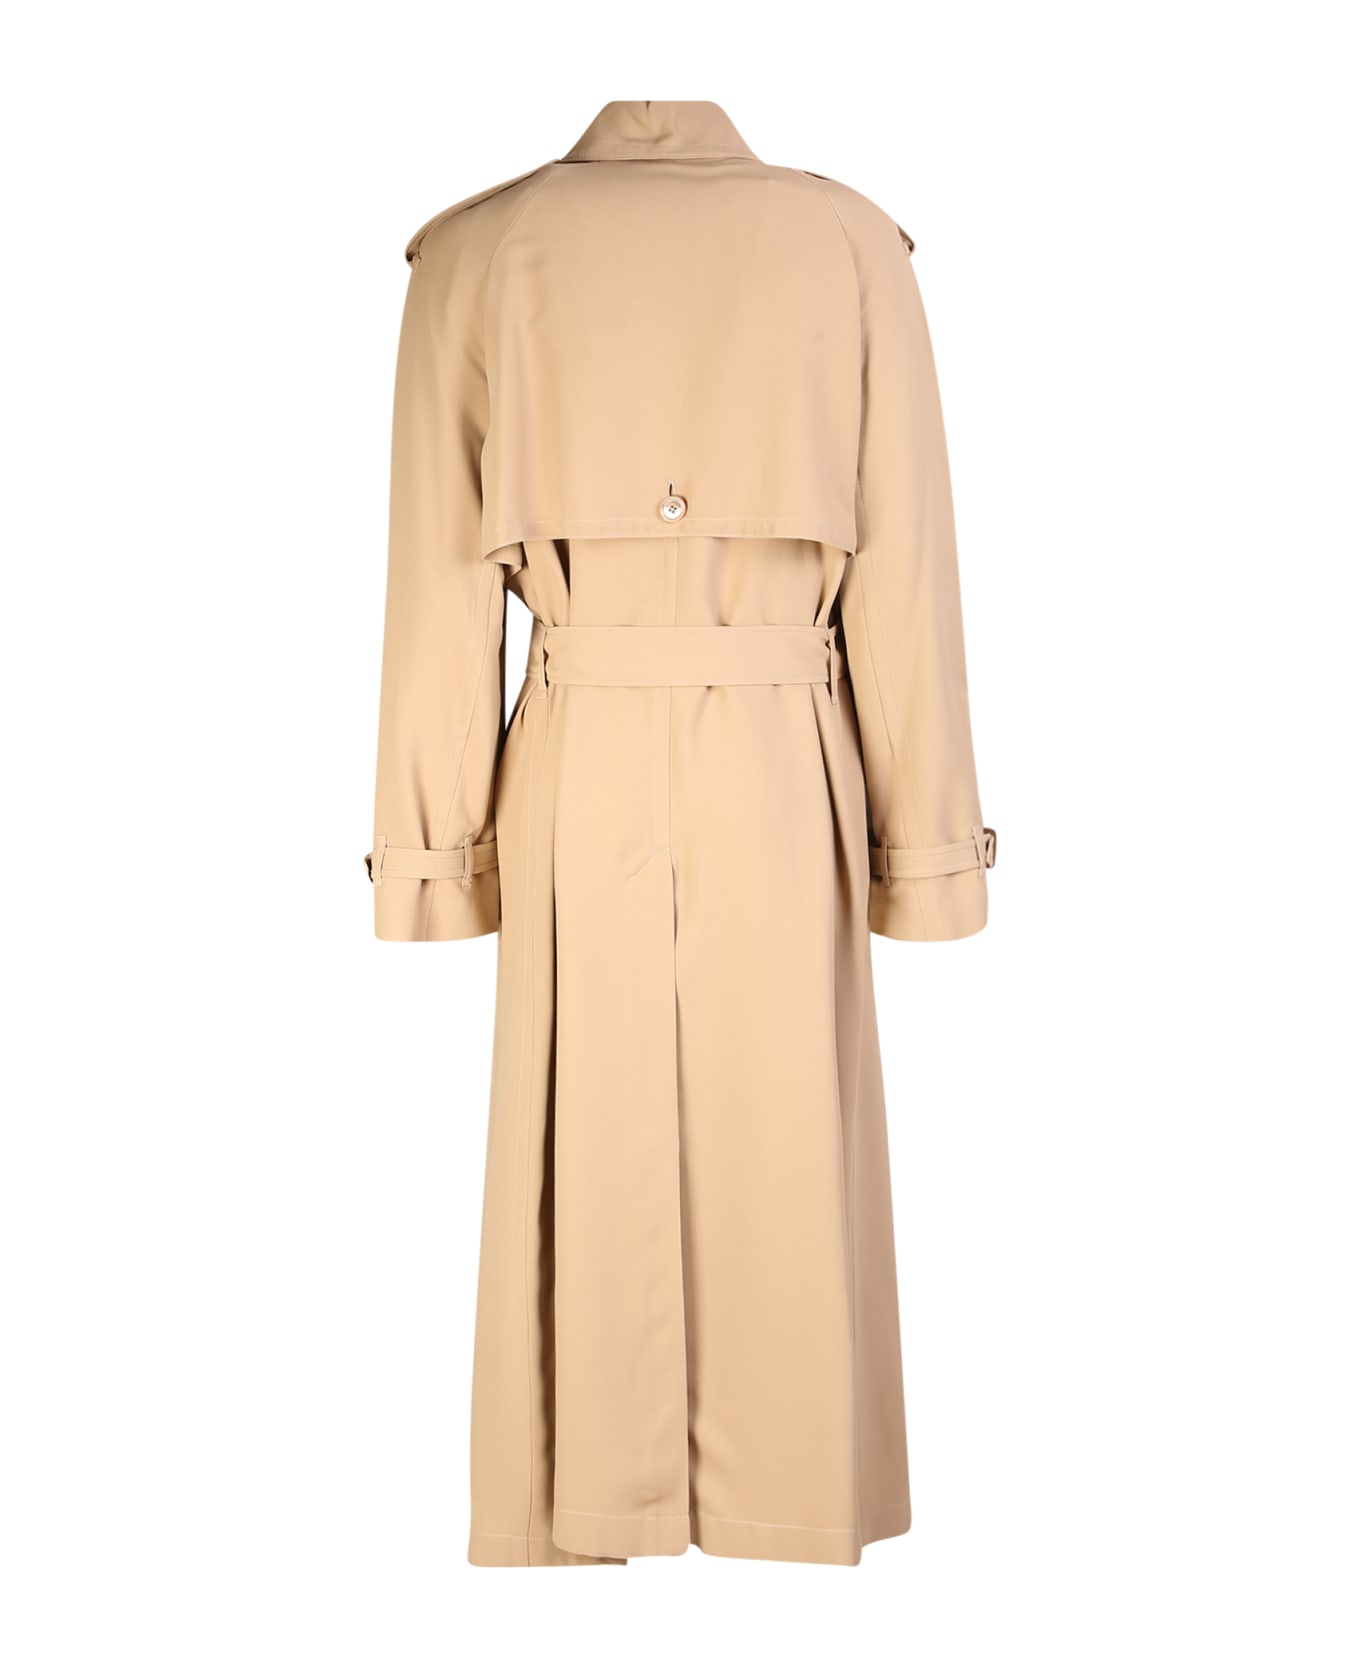 Burberry Double-breasted Trench Coat Beige - Beige